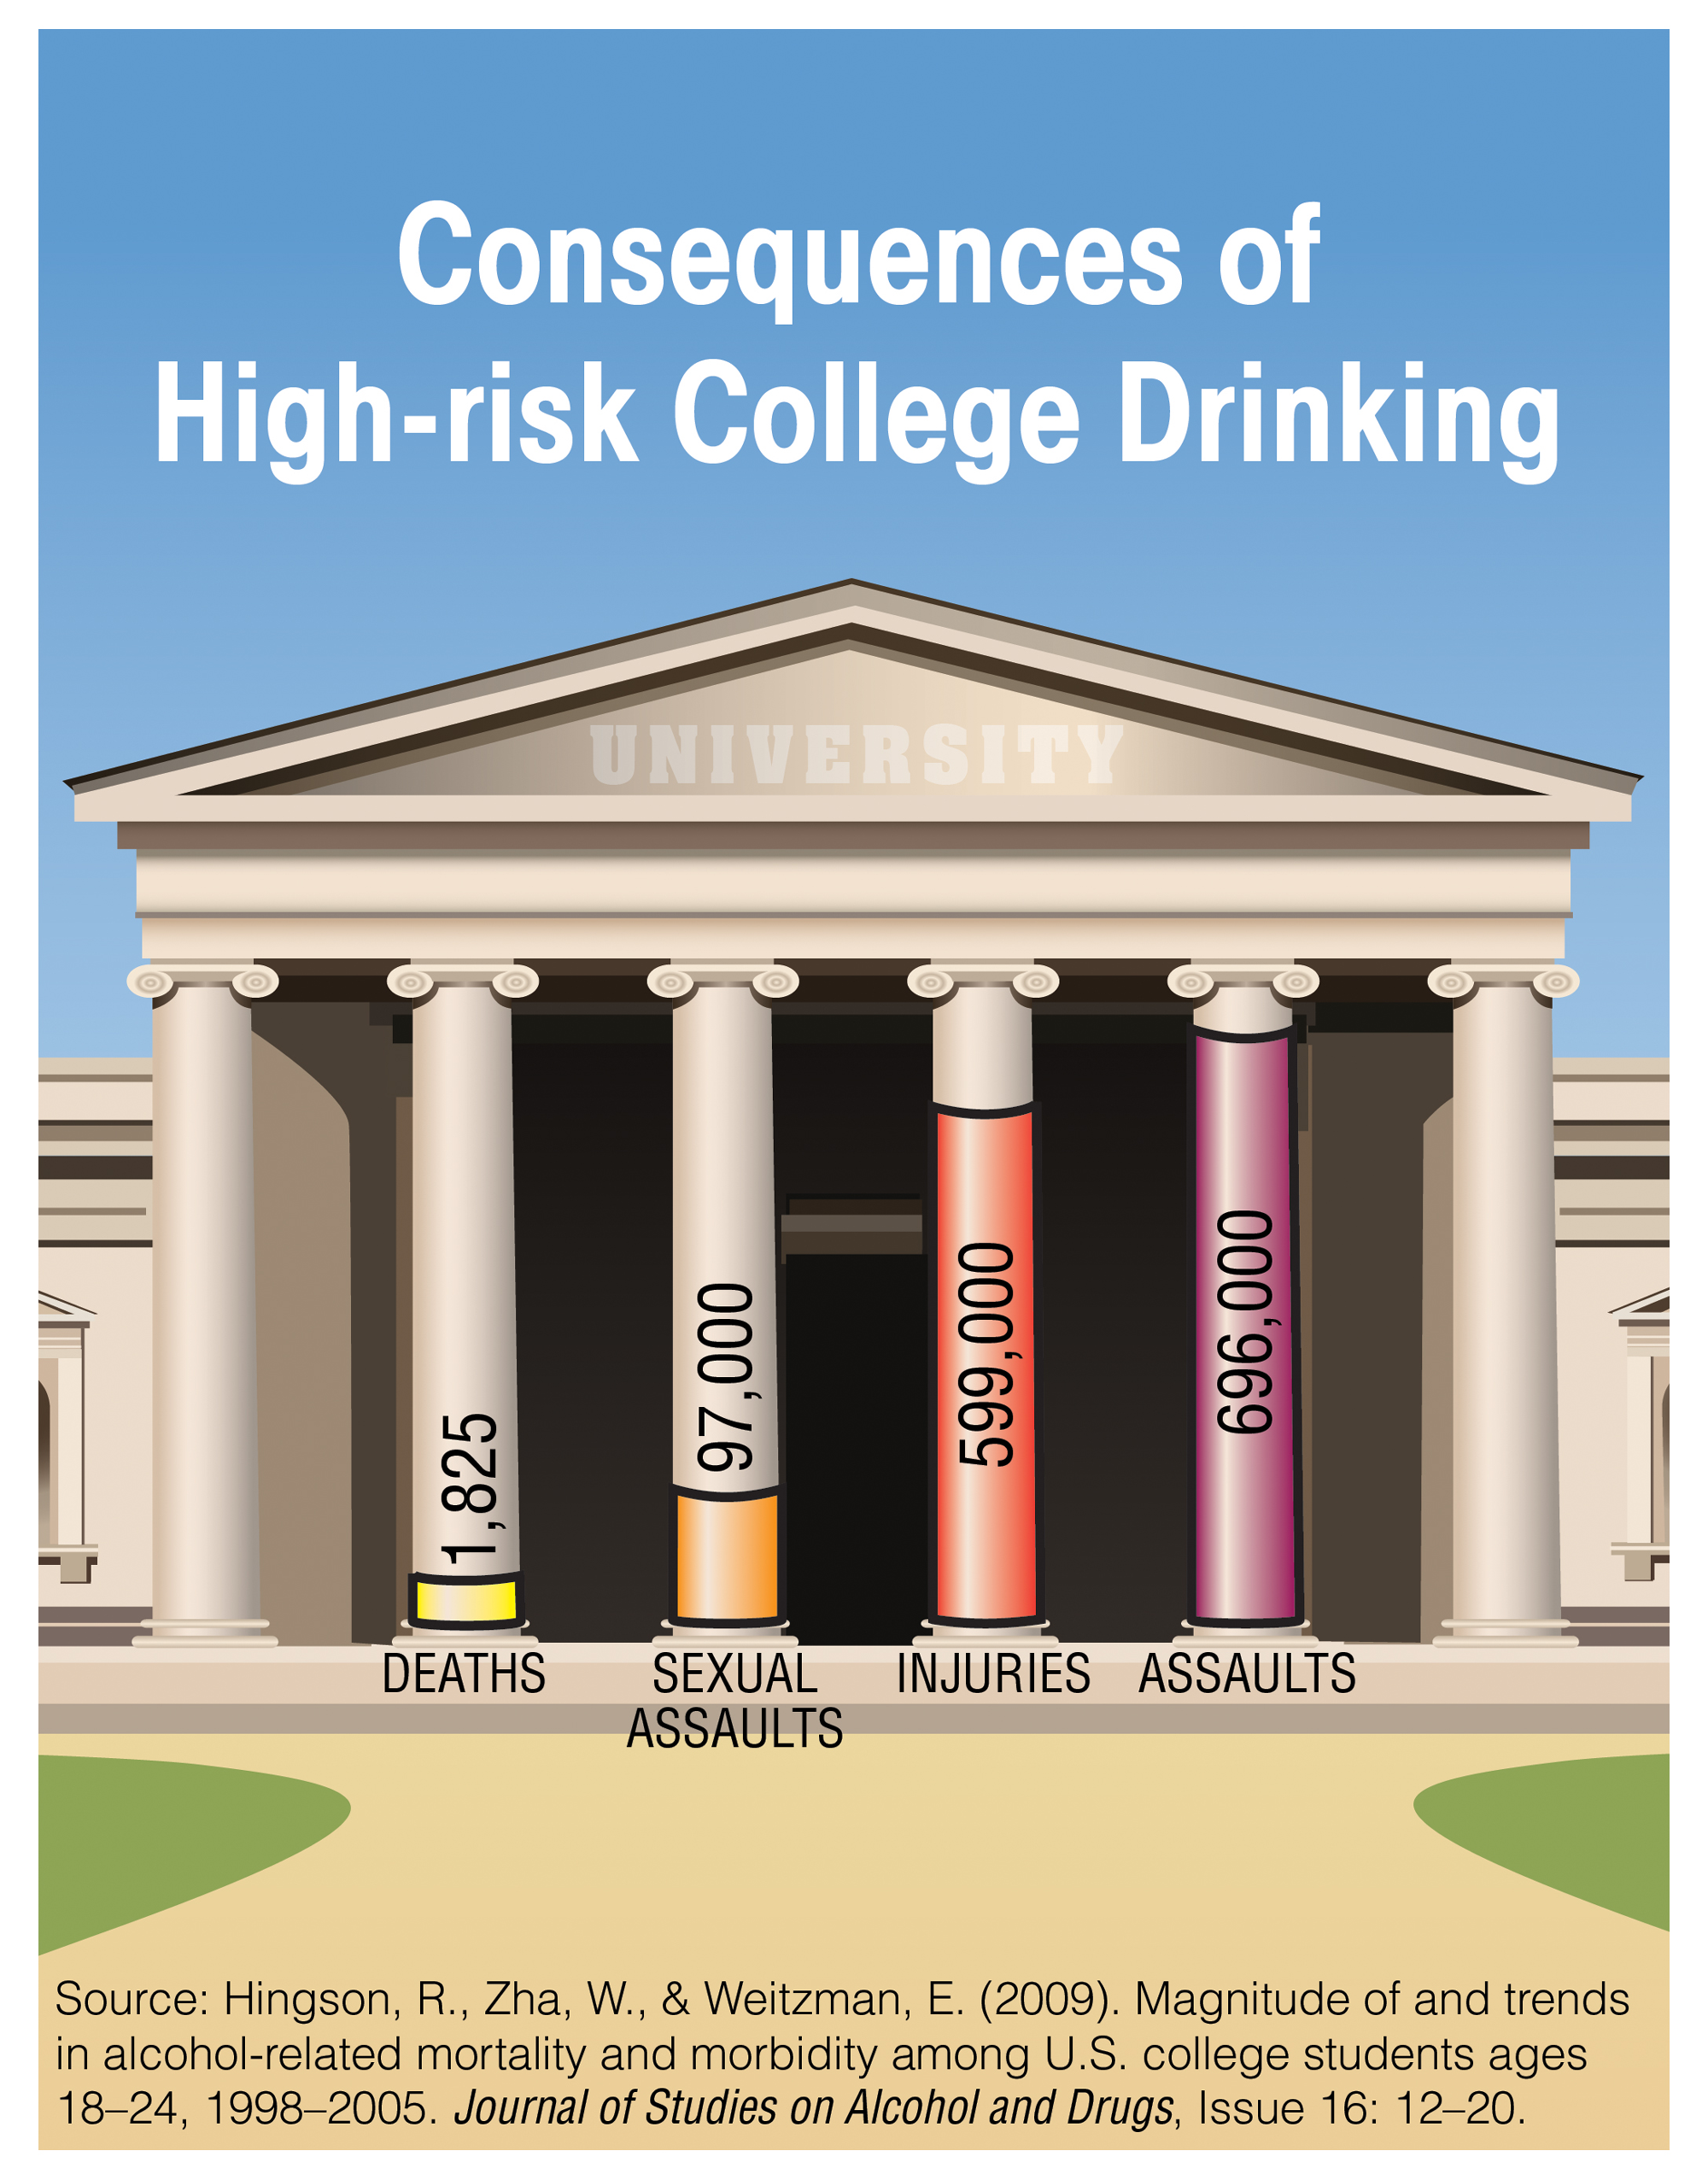 Consequences of High-risk College Drinking Chart - Deaths 1,825; Sexual Assaults 97,000; Injuries 599,000; and Assaults 696,00